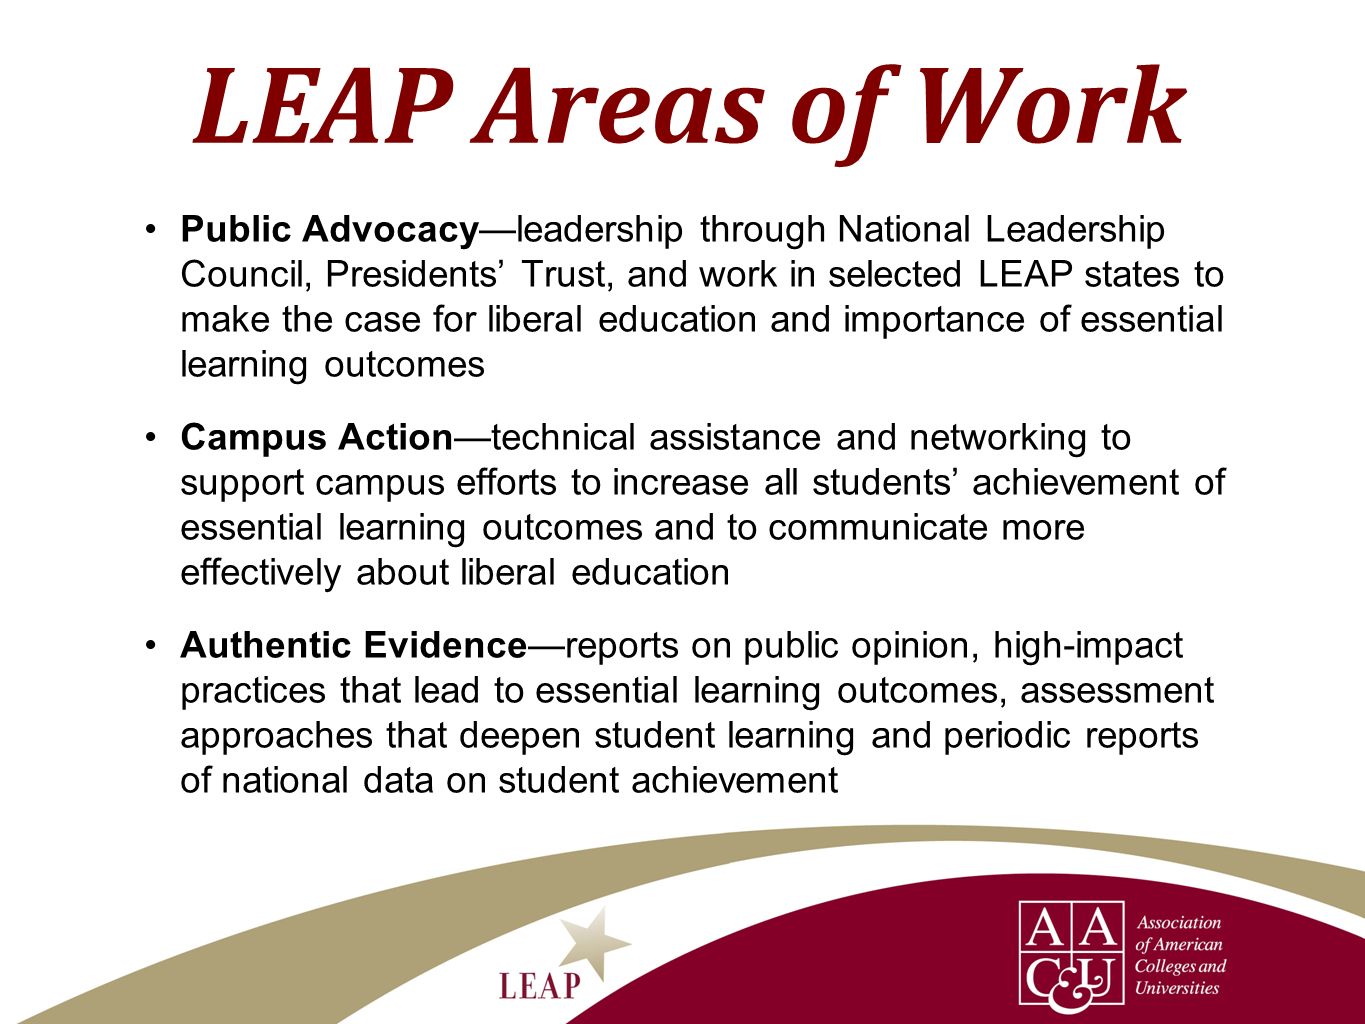 LEAP Areas of Work Public Advocacyleadership through National Leadership Council, Presidents Trust, and work in selected LEAP states to make the case for liberal education and importance of essential learning outcomes Campus Actiontechnical assistance and networking to support campus efforts to increase all students achievement of essential learning outcomes and to communicate more effectively about liberal education Authentic Evidencereports on public opinion, high-impact practices that lead to essential learning outcomes, assessment approaches that deepen student learning and periodic reports of national data on student achievement